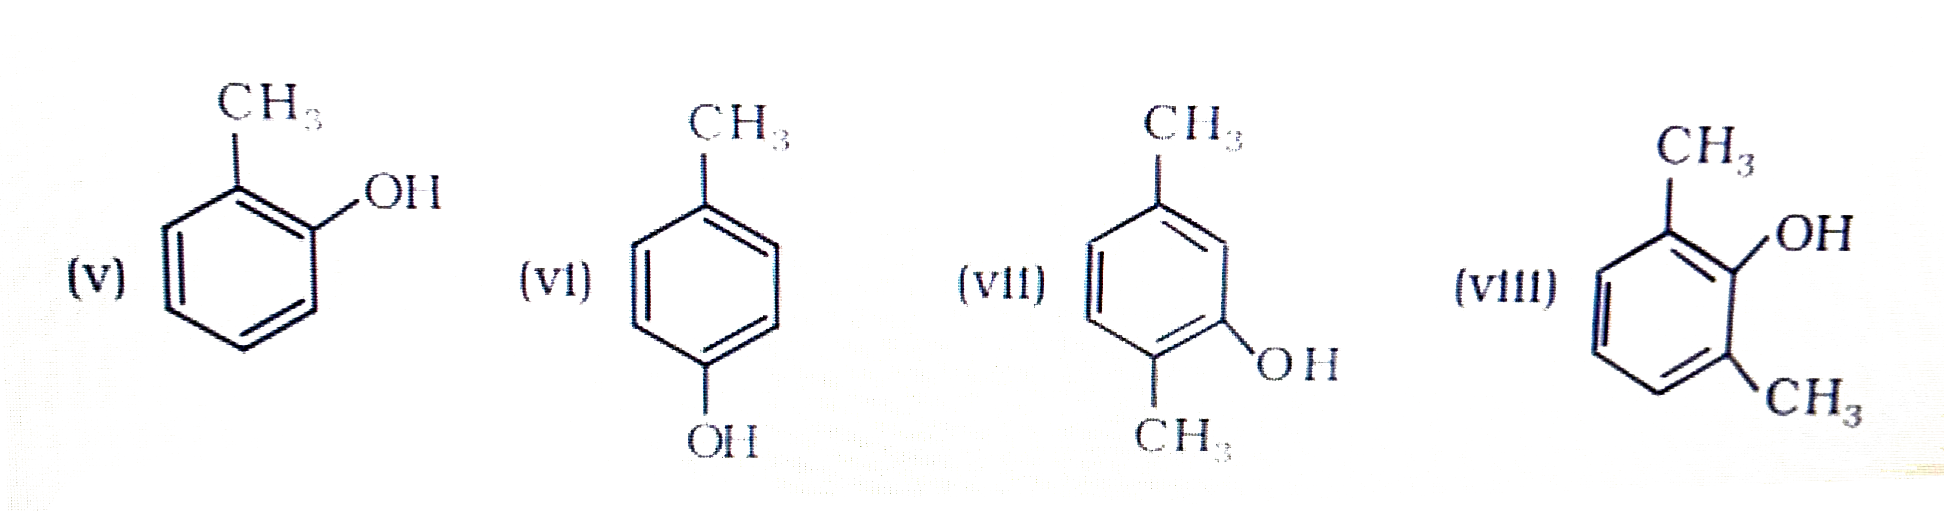 Write IUPAC names of the following compounds:   (i) CH(3)-underset(CH(3))underset(|)(CH)-underset(OH)underset(|)(CH)-overset(CH(3))overset(|)underset(CH(3))underset(|)(C)-CH(3)  (ii) CH(3)-underset(OH)underset(|)(CH)-CH(2)-underset(OH)underset(|)(CH)-underset(C(2)H(5))underset(|)(CH)-CH(2)-CH(3)   (iii) CH(3)-underset(OH)underset(|)(CH)-underset(OH)underset(|)(CH)-CH(3) (iv) HO-CH(2)-underset(OH)underset(|)(CH)-CH(2)-OH      (ix) CH(3)-O-CH(2)-underset(CH(3))underset(|)(CH)-CH(3)  (x) C(6)H(5)-O-C(2)H(5)    (xi) C(6)H(5)-O-C(7)H(15)(n-)  (xii) CH(3)-CH(2)-O-underset(CH(3))underset(|)(CH)-CH(2)-CH(3)